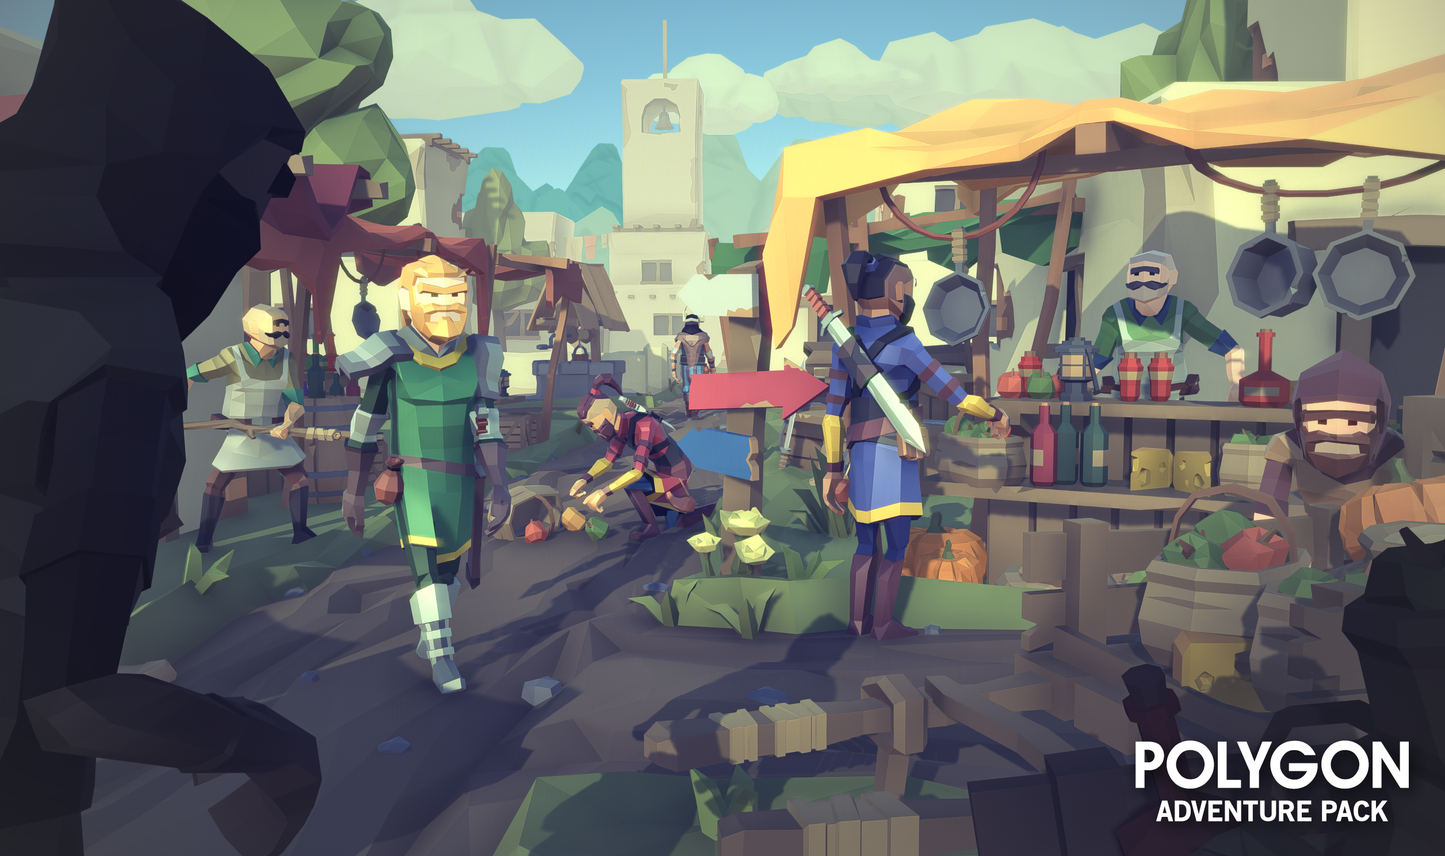 Marketplace 3D low poly asset scene with characters interacting with the environment